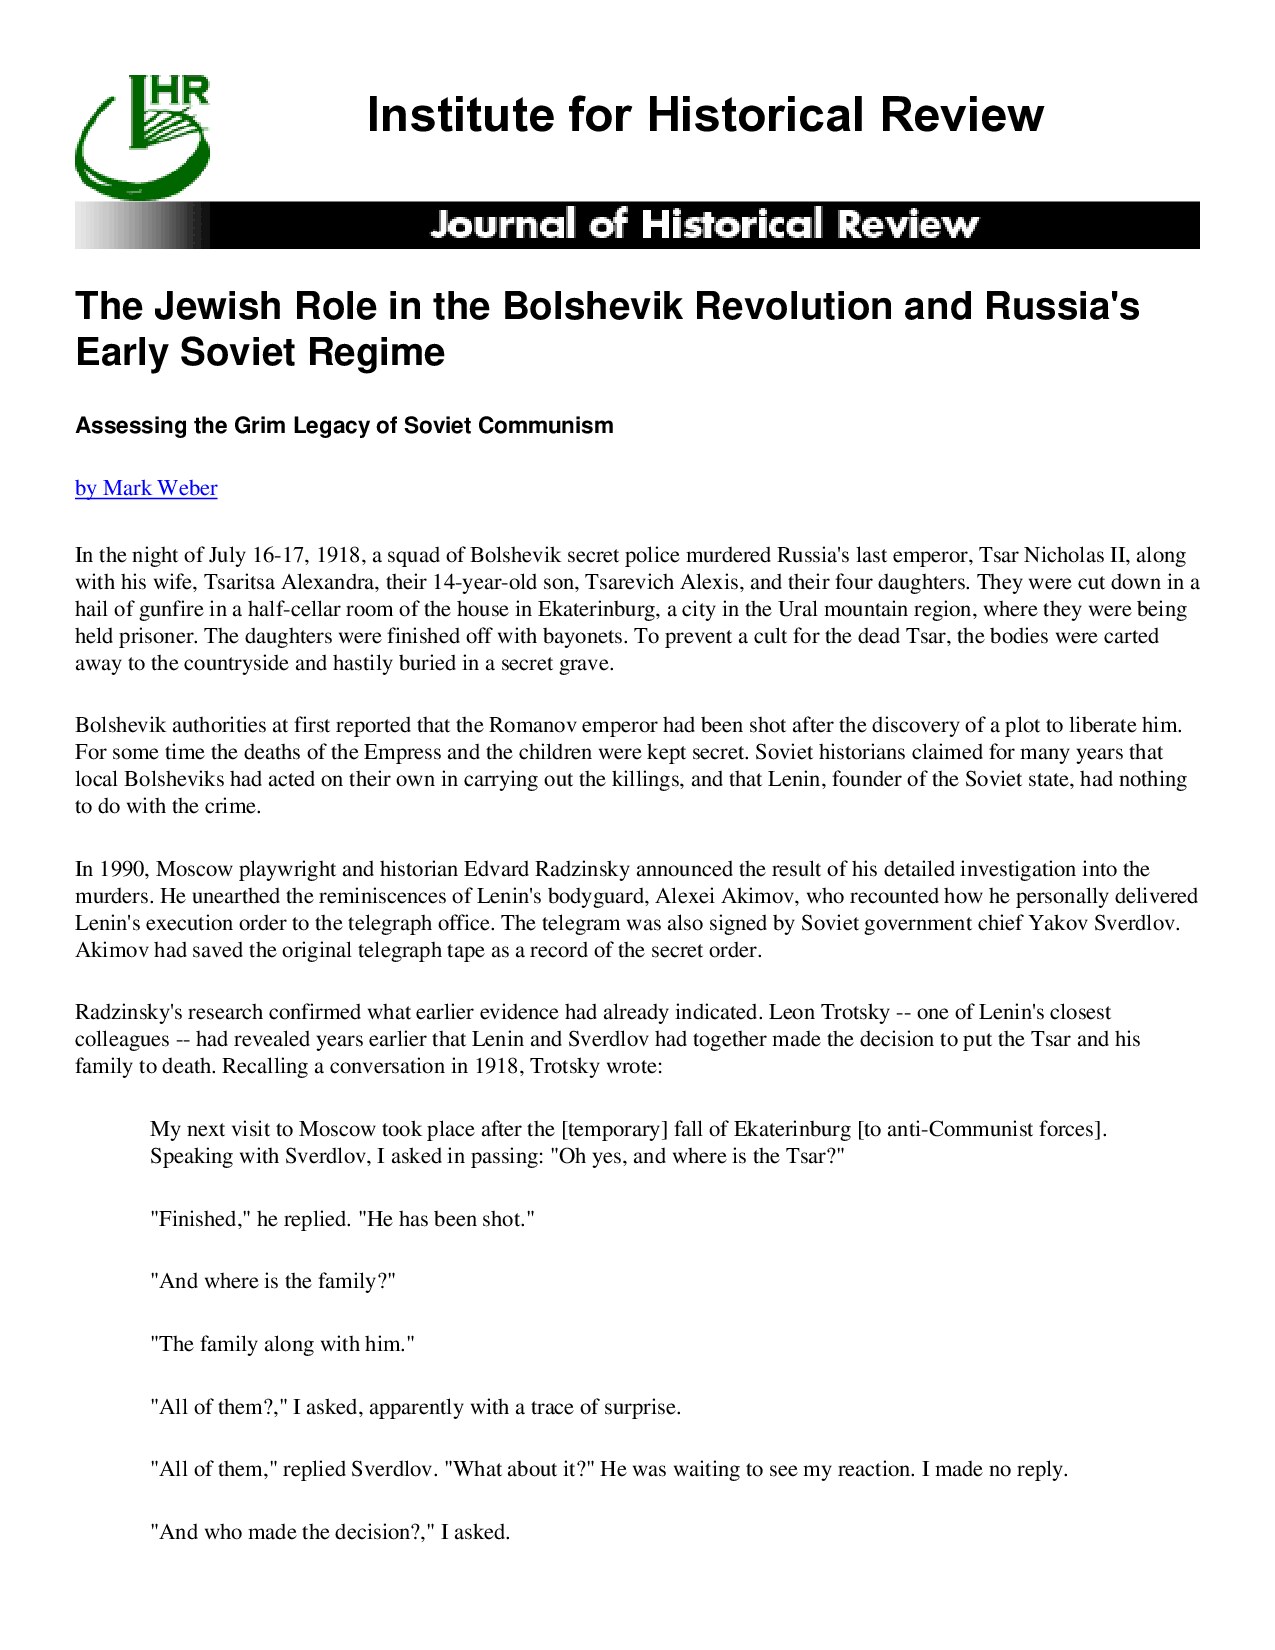 The Jewish Role in the Bolshevik Revolution and Russia's Early Soviet Regime